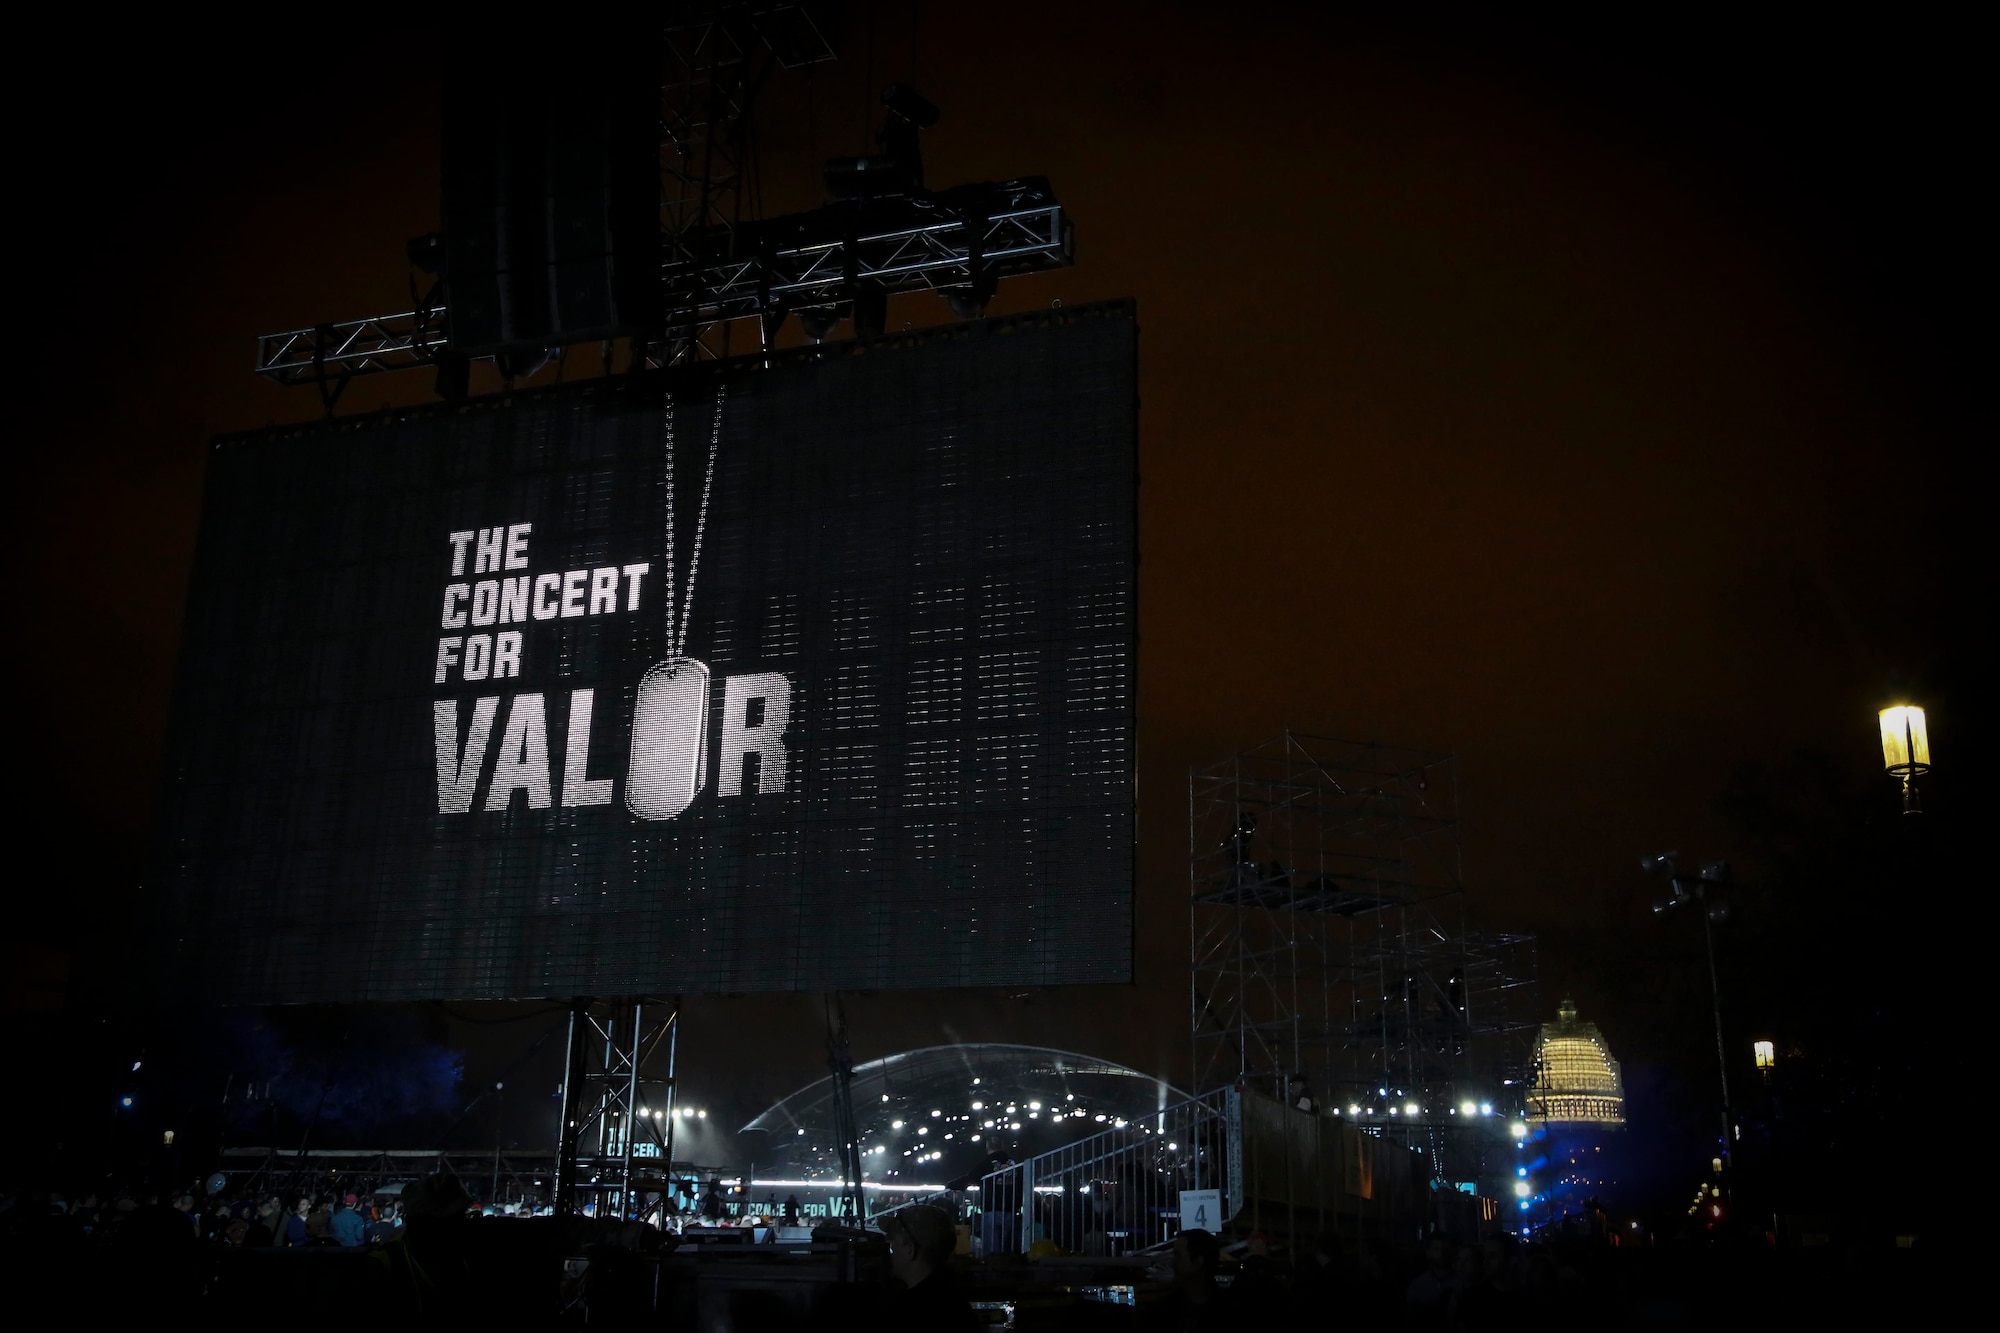 HBO's Concert for Valor," a celebration to honor America's veterans, featured musical performances by Carrie Underwood, Rihanna, Bruce Springsteen, Eminem, Metallica among others. (U.S. Air National Guard photo by 1st Lt. Nathan Wallin)